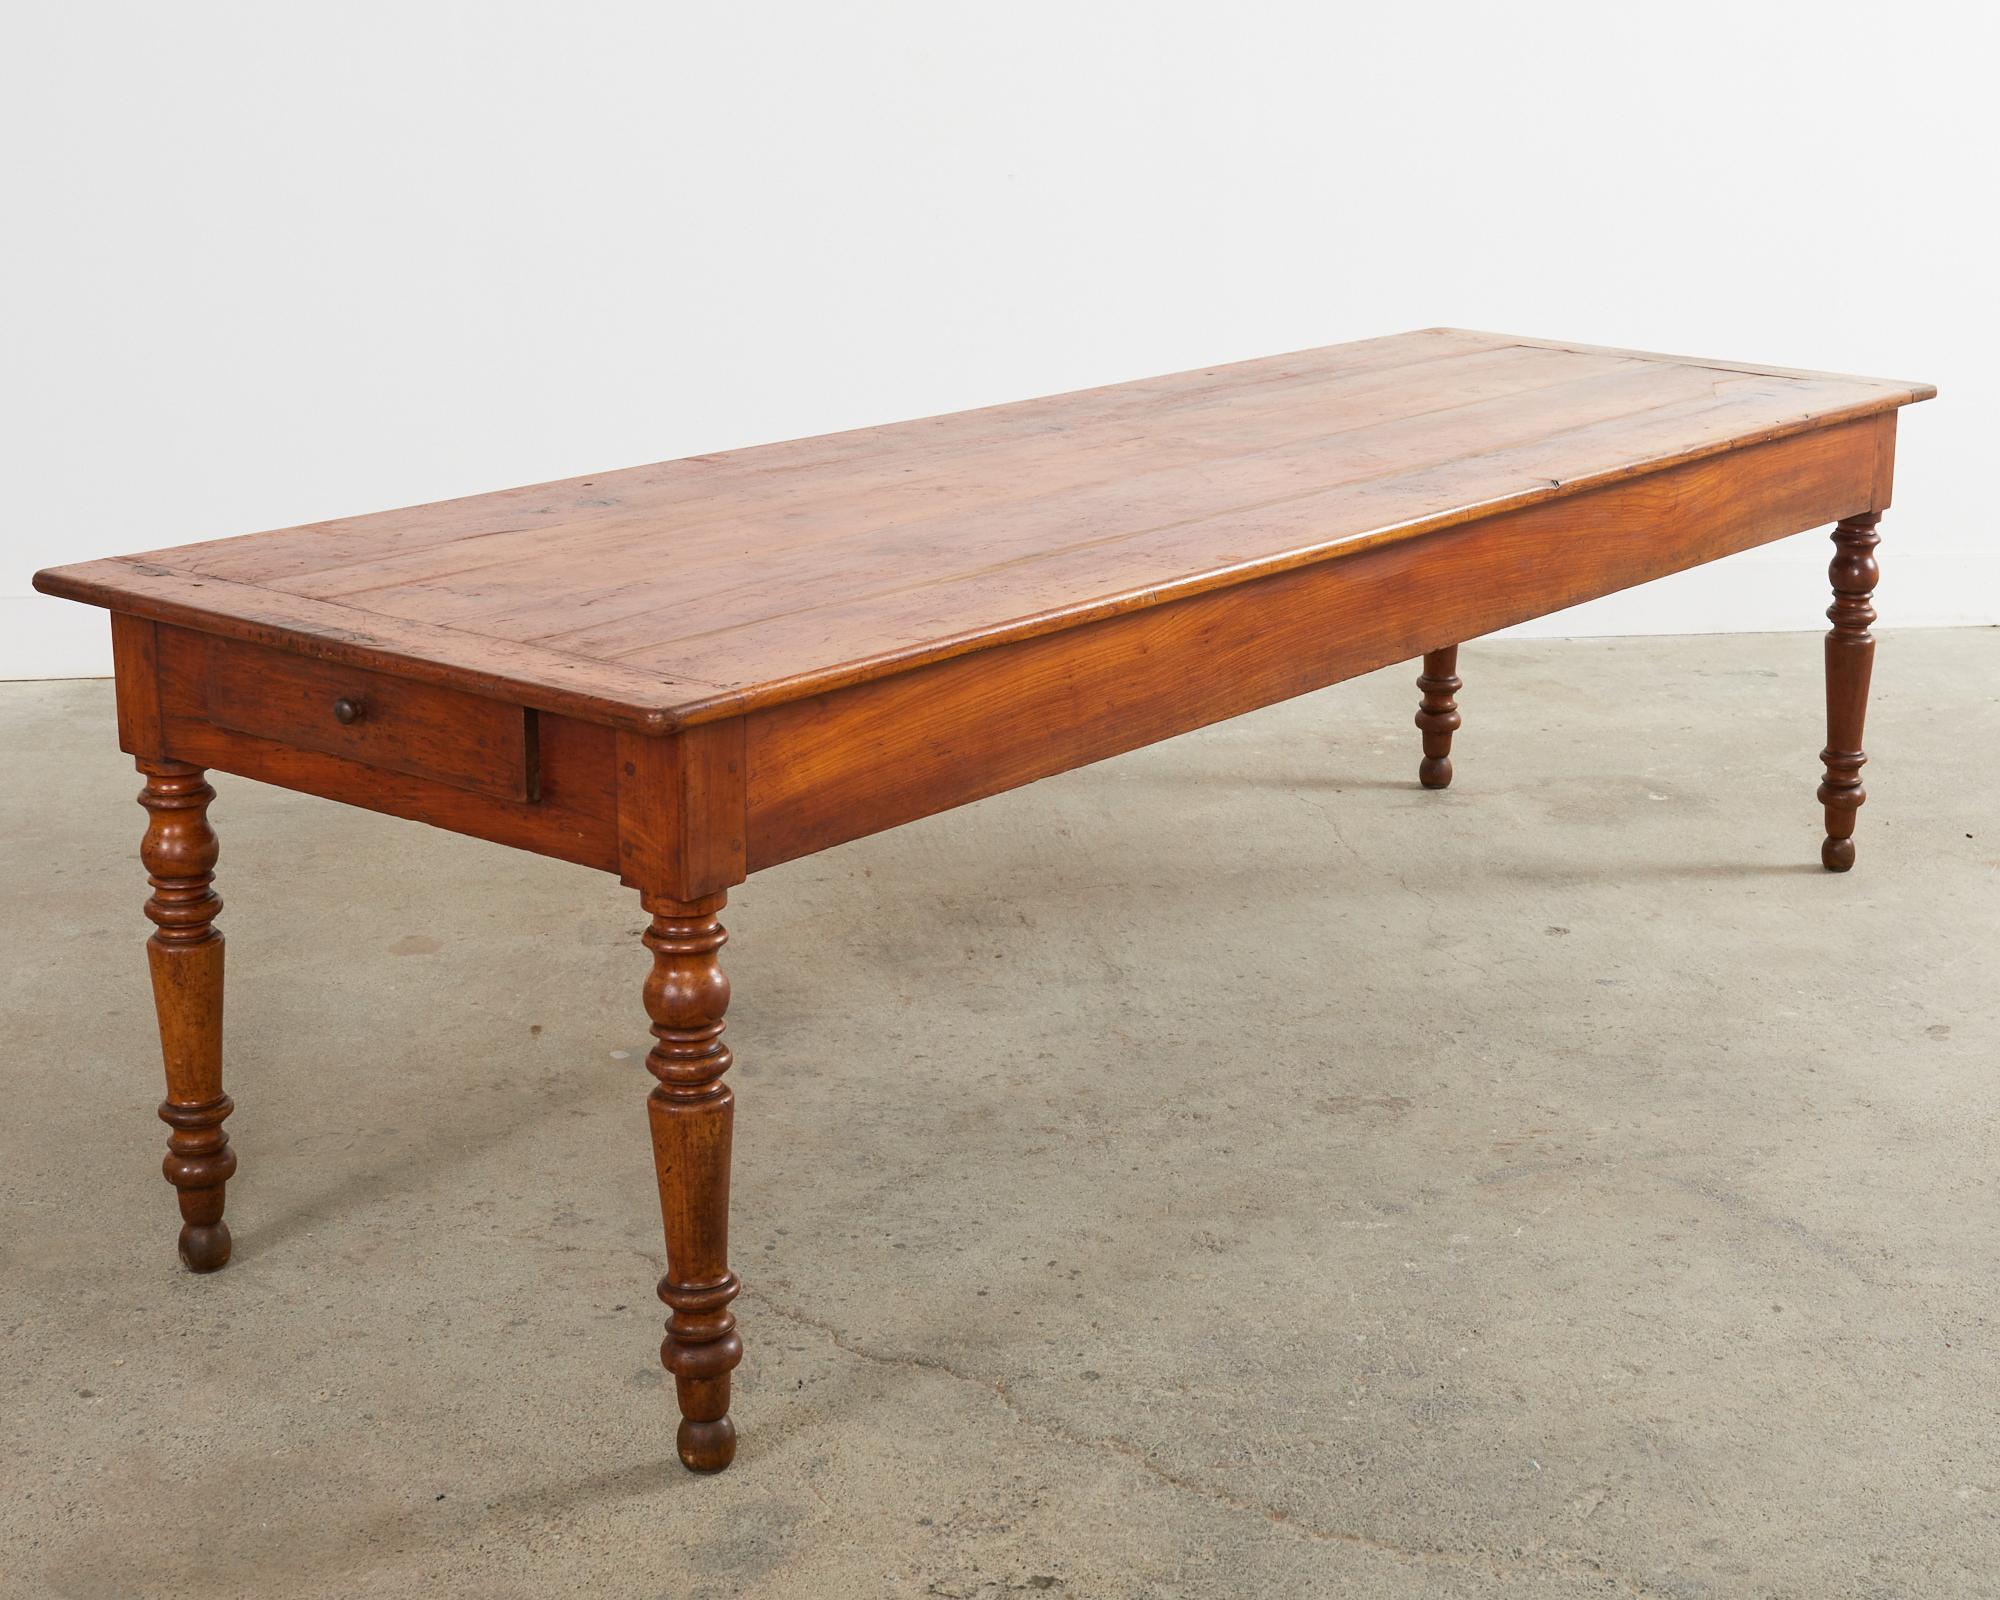 Hand-Crafted 19th Century Country French Provincial Fruitwood Farmhouse Harvest Table For Sale